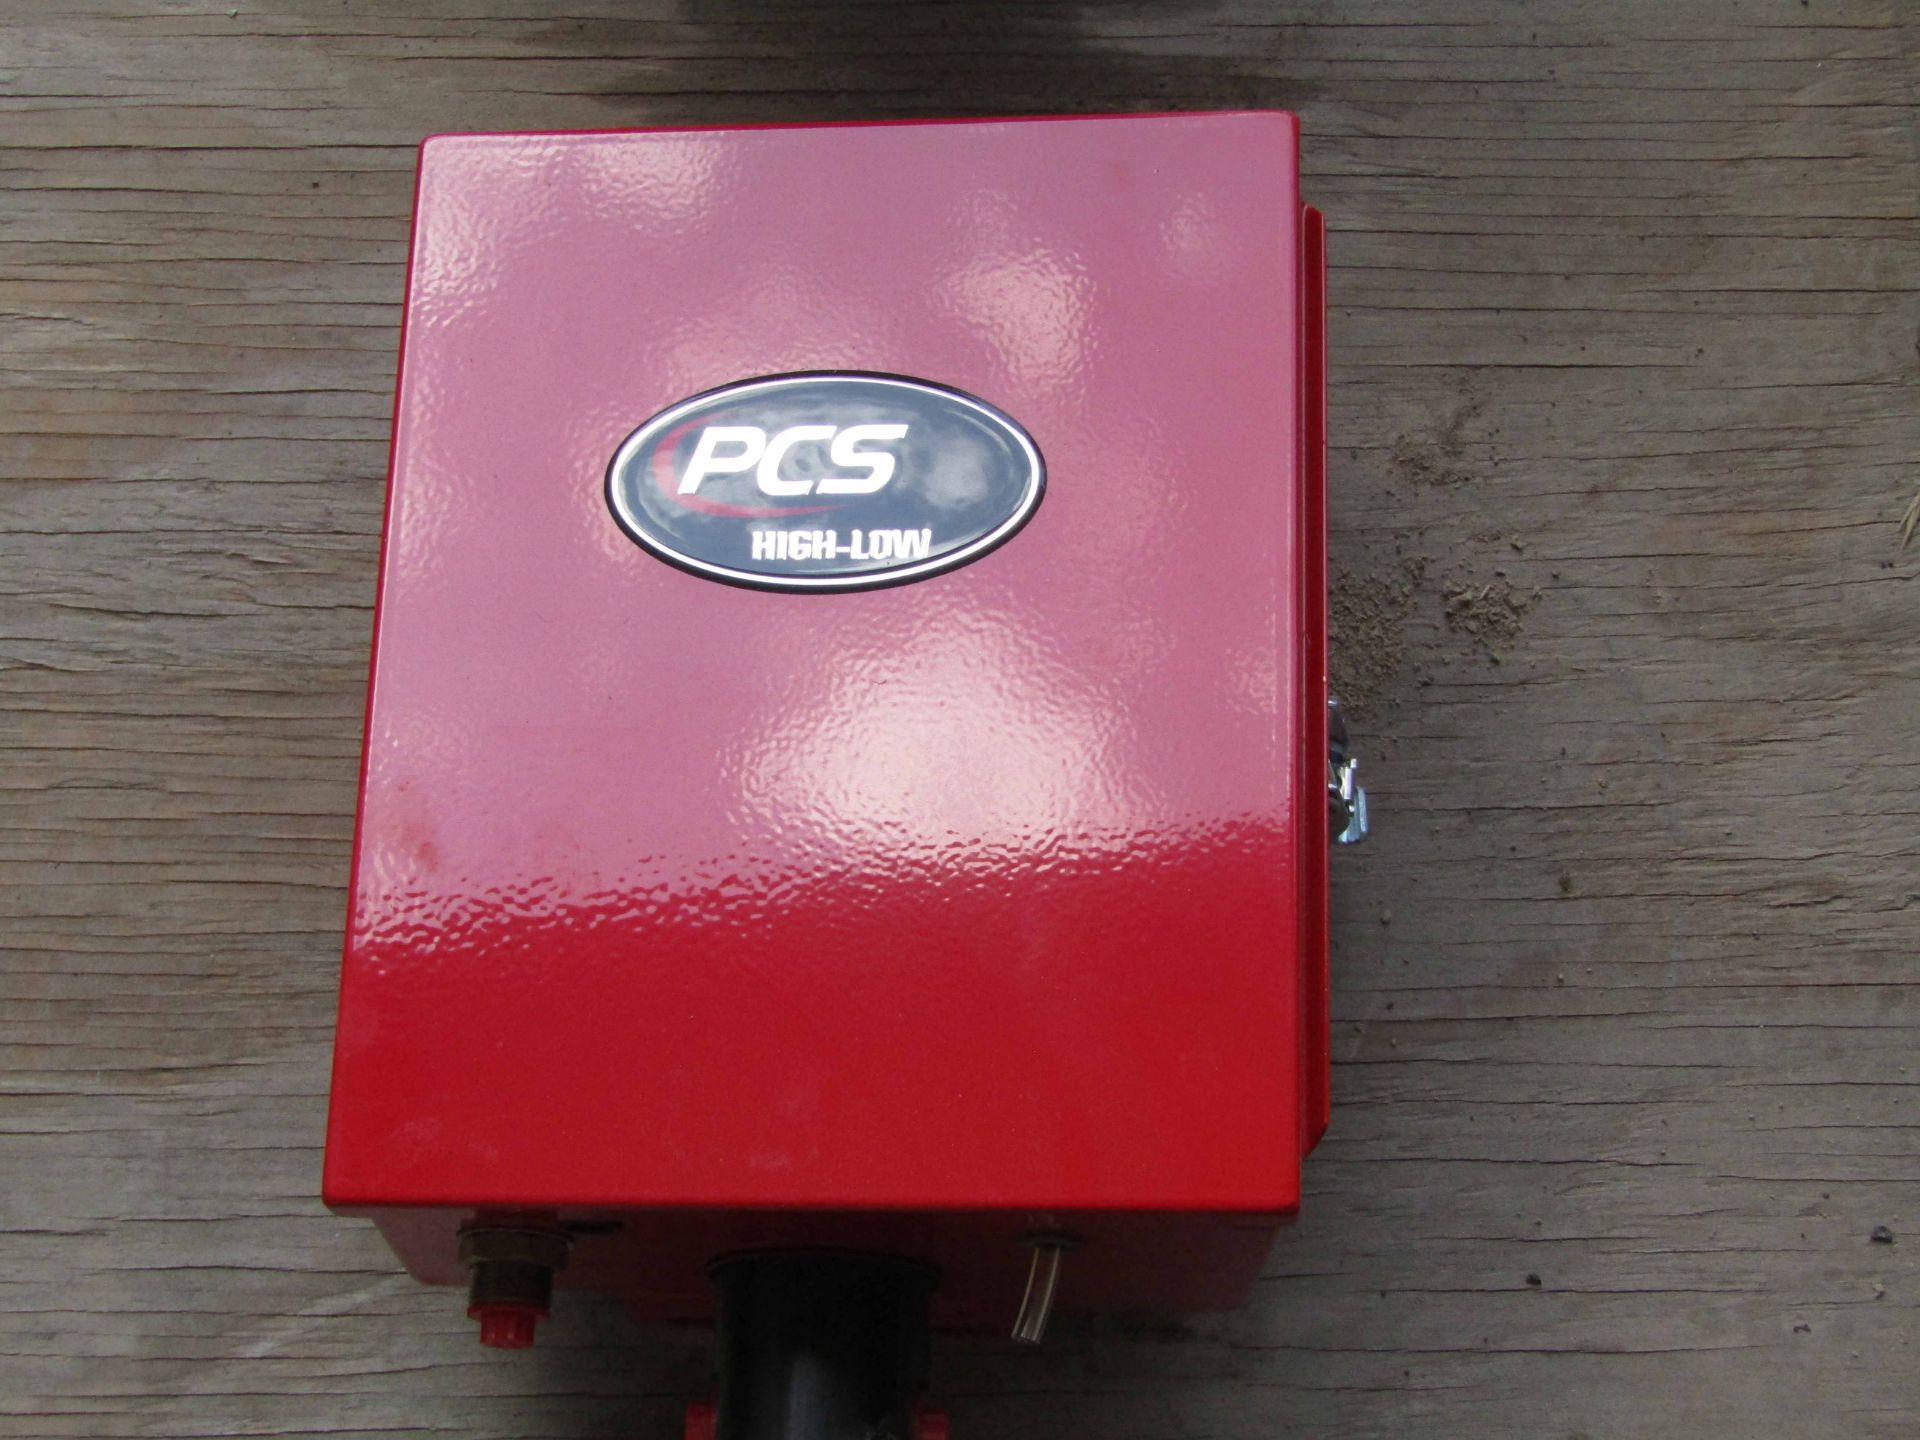 LOT CONSISTING OF: (APPROX. 33) PRESSURE CONTROLLER,HIGH-LOW,PCS-FERGUSON,PCS HIGH-LOW CONTROLLER (